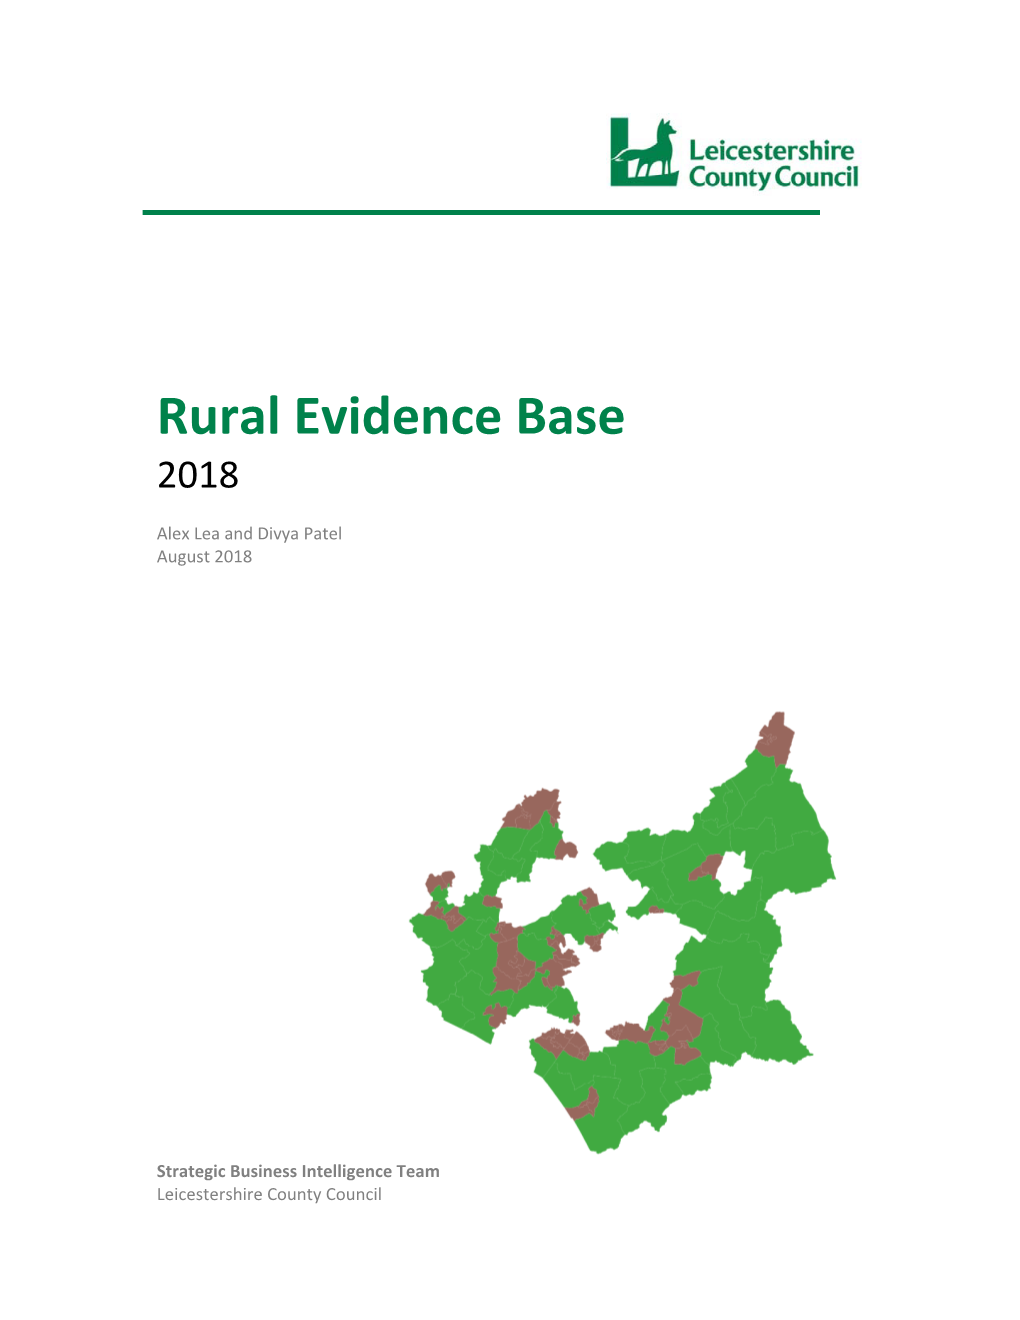 2018 Leicestershire Rural Evidence Base